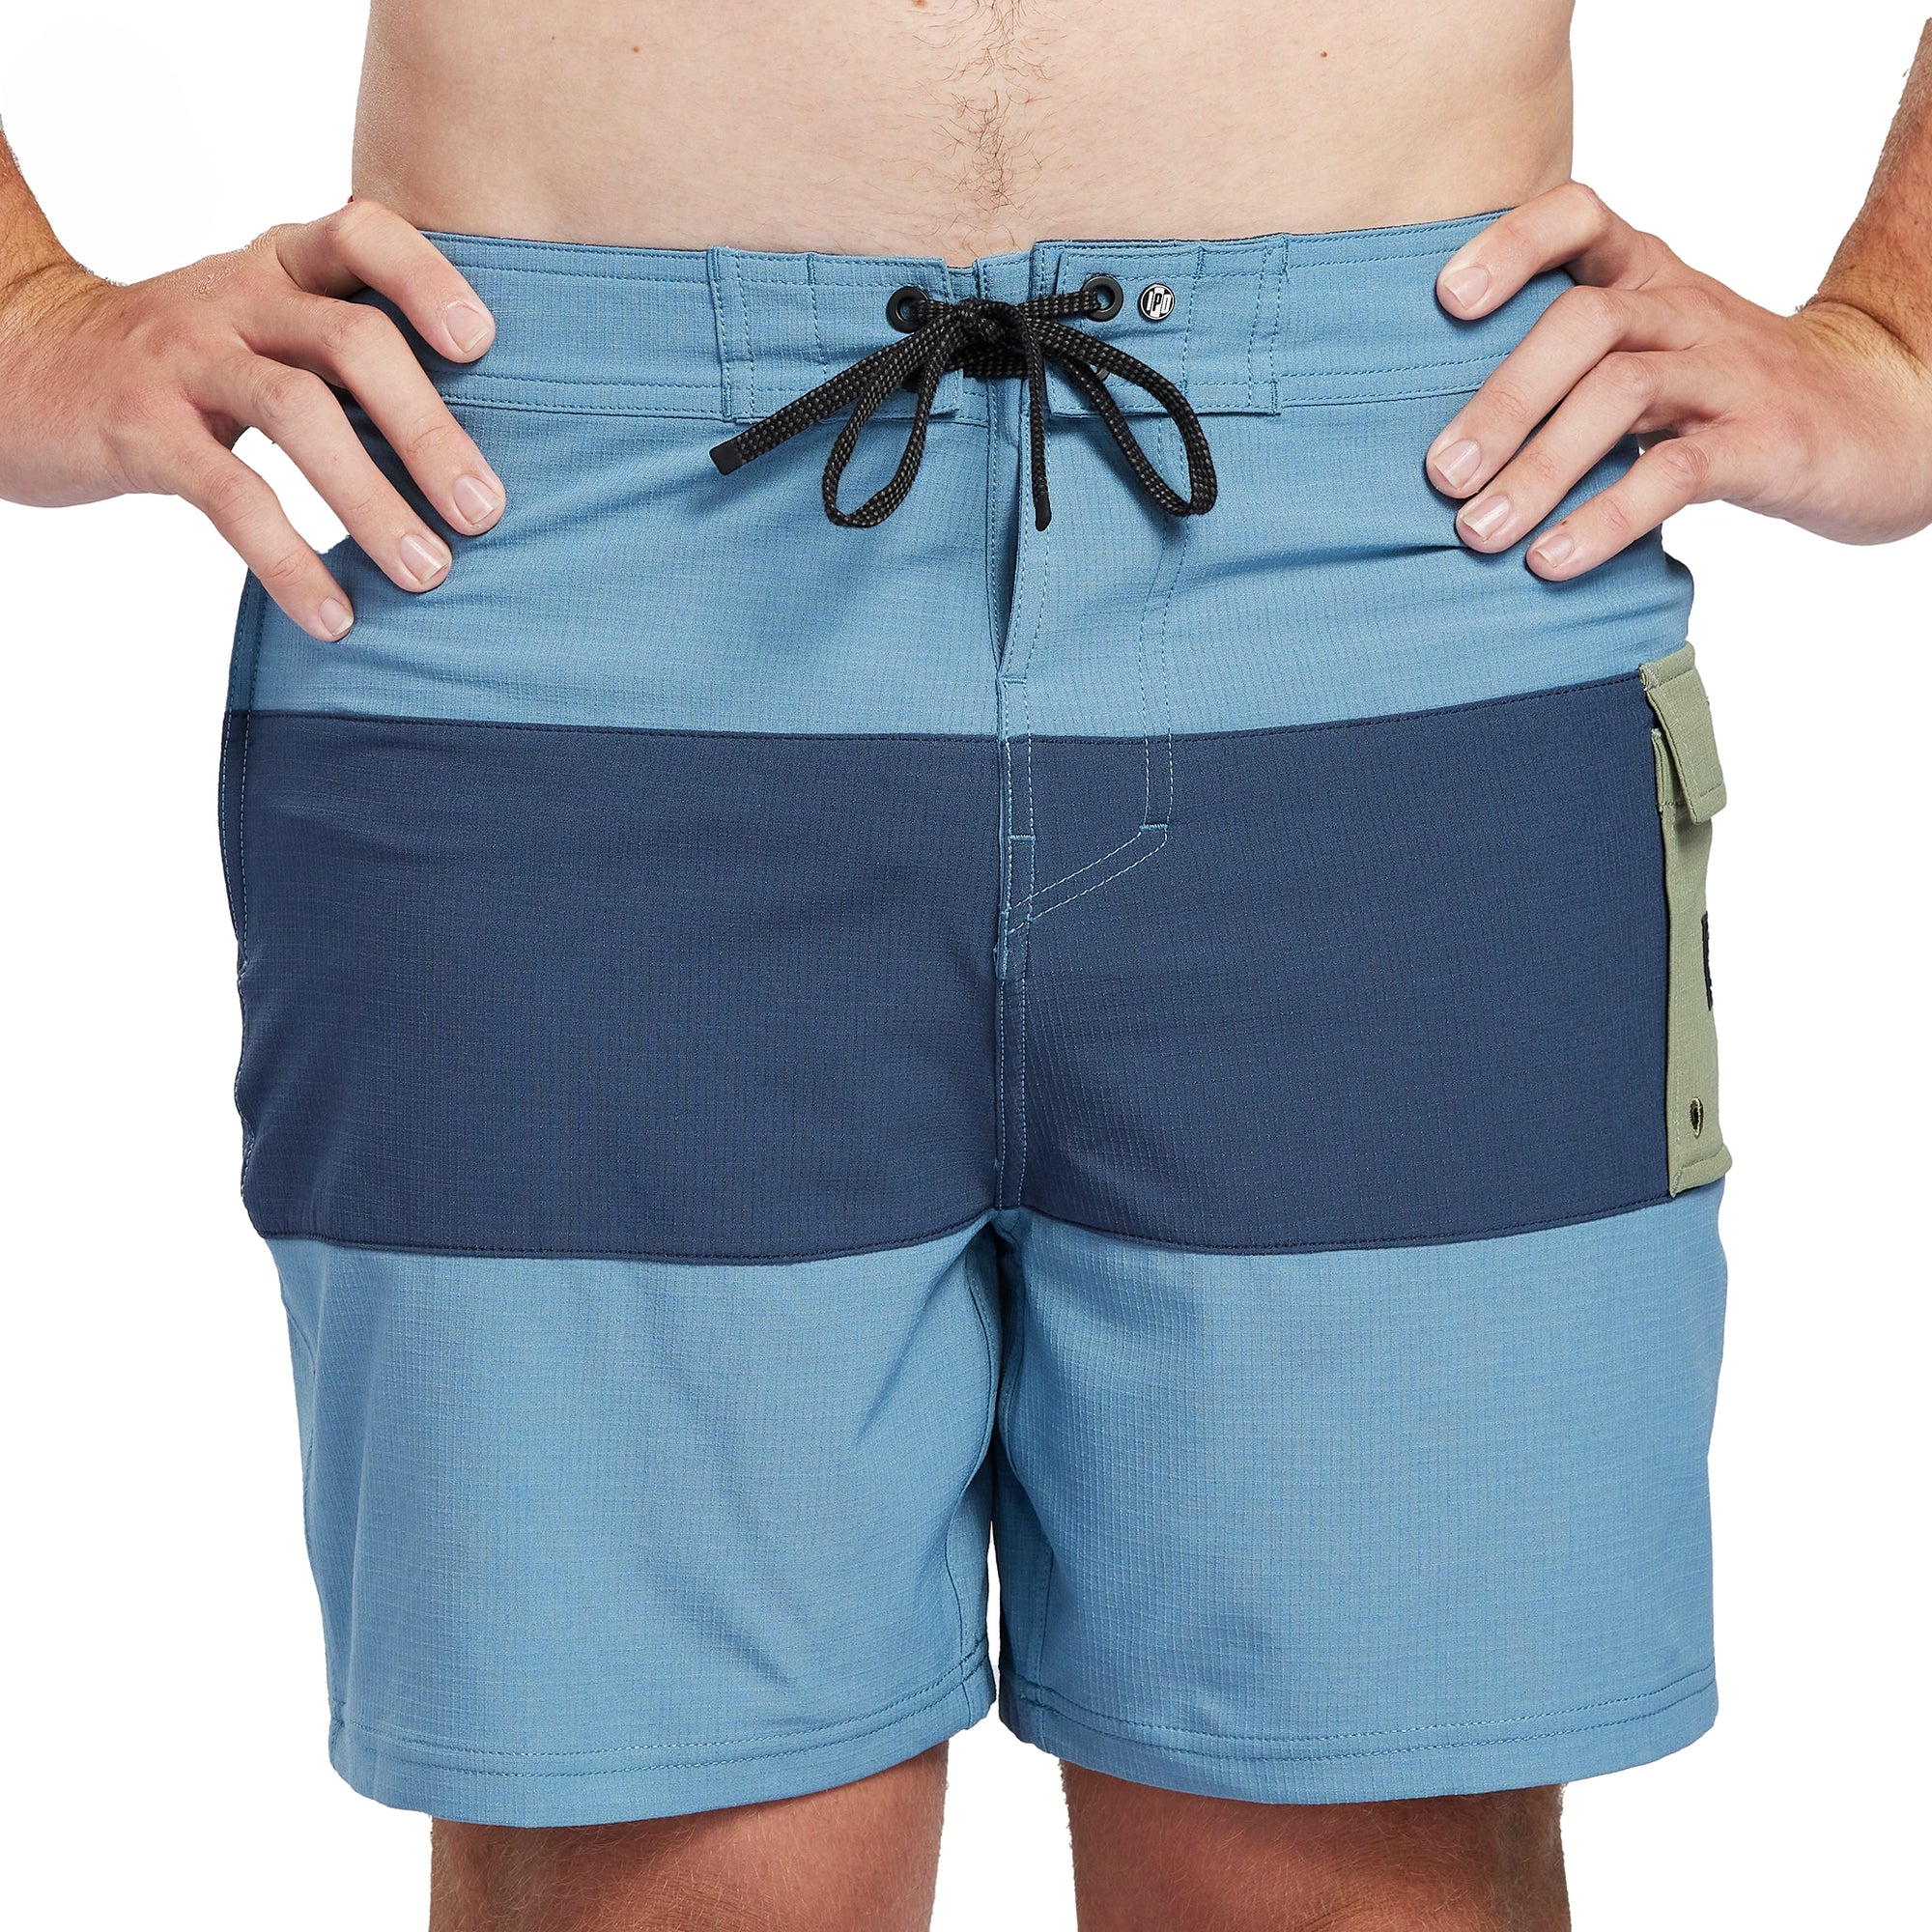 Burnt red boardshorts with a large olive green stripe through the middle and a tan side pocket front view.